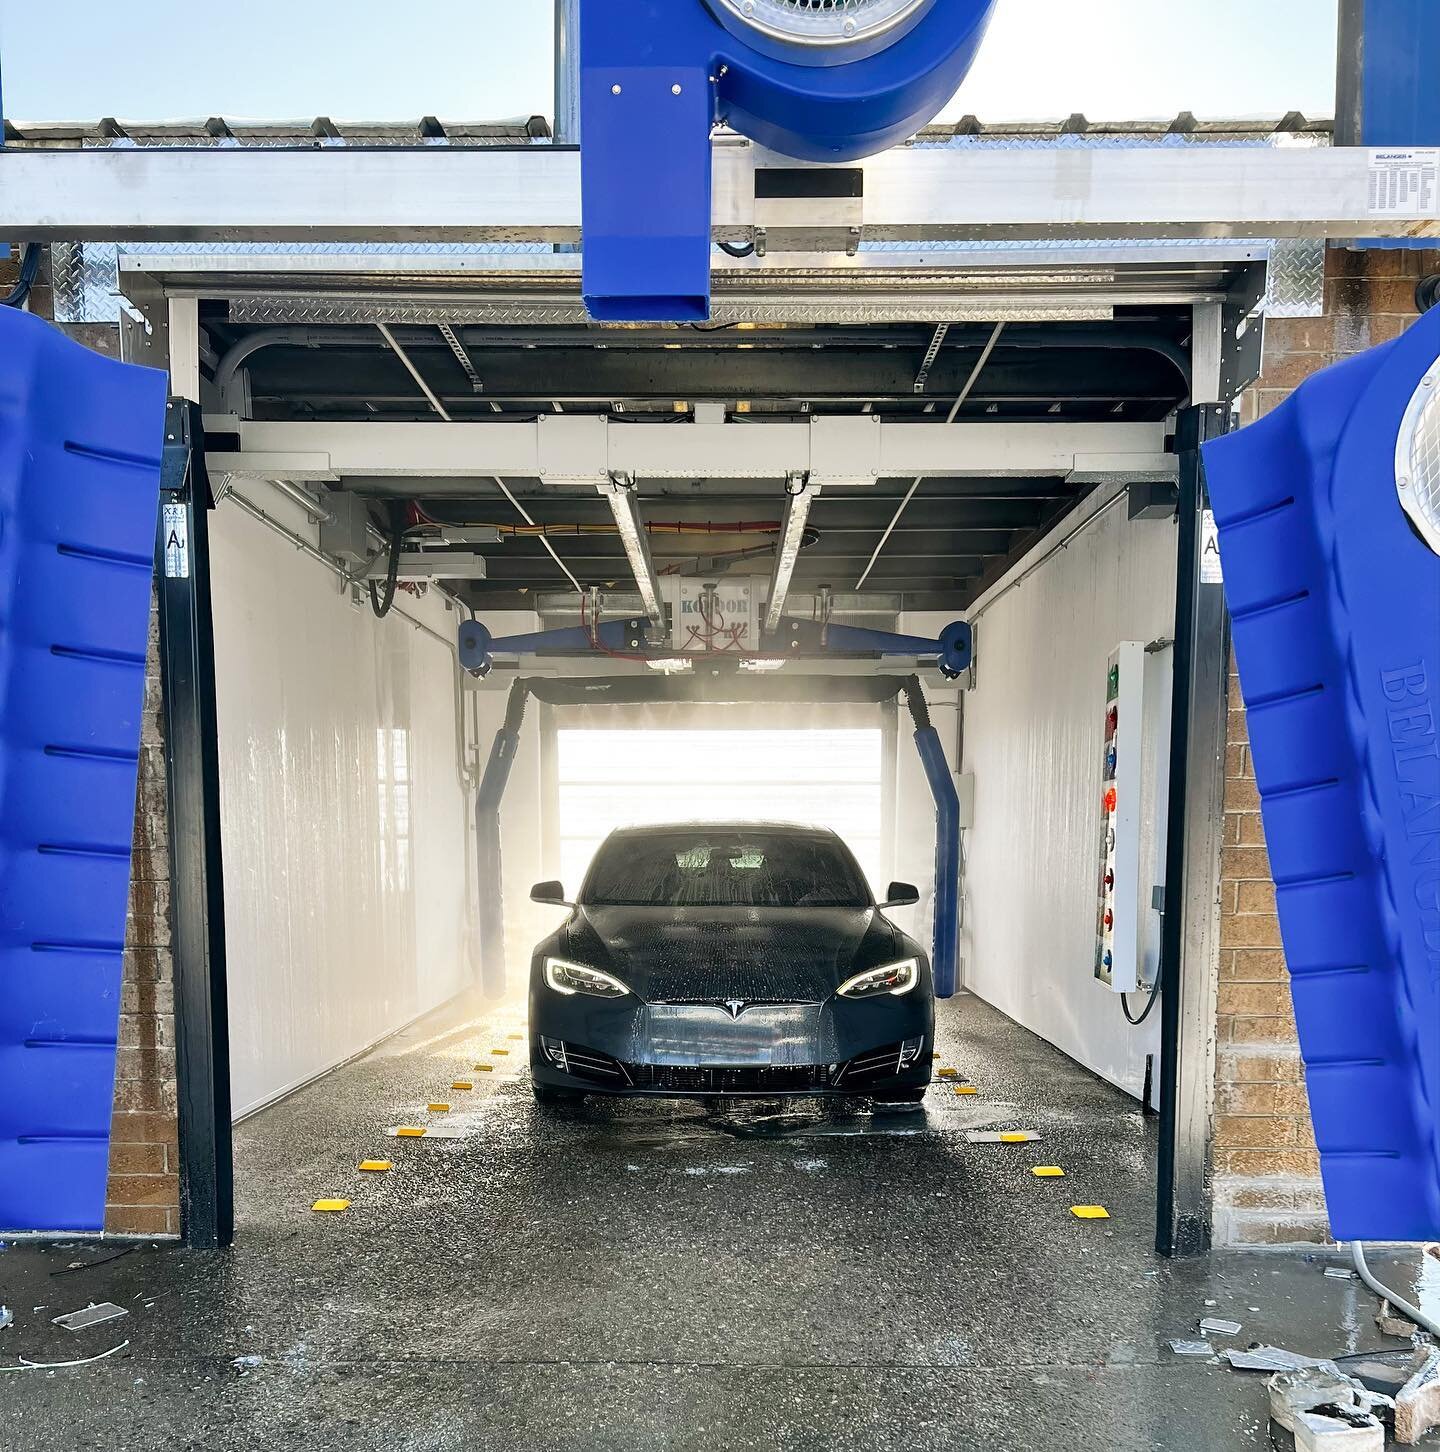 The NEW touchless automatics are OPEN at Longmont South! 

📱 make sure to download our app to get a free wash! **link in bio**

#longmontloveslocal #coloradofamilyowned #coloradonatives #longmontcarwash #touchlesscarwash #freedomautowash